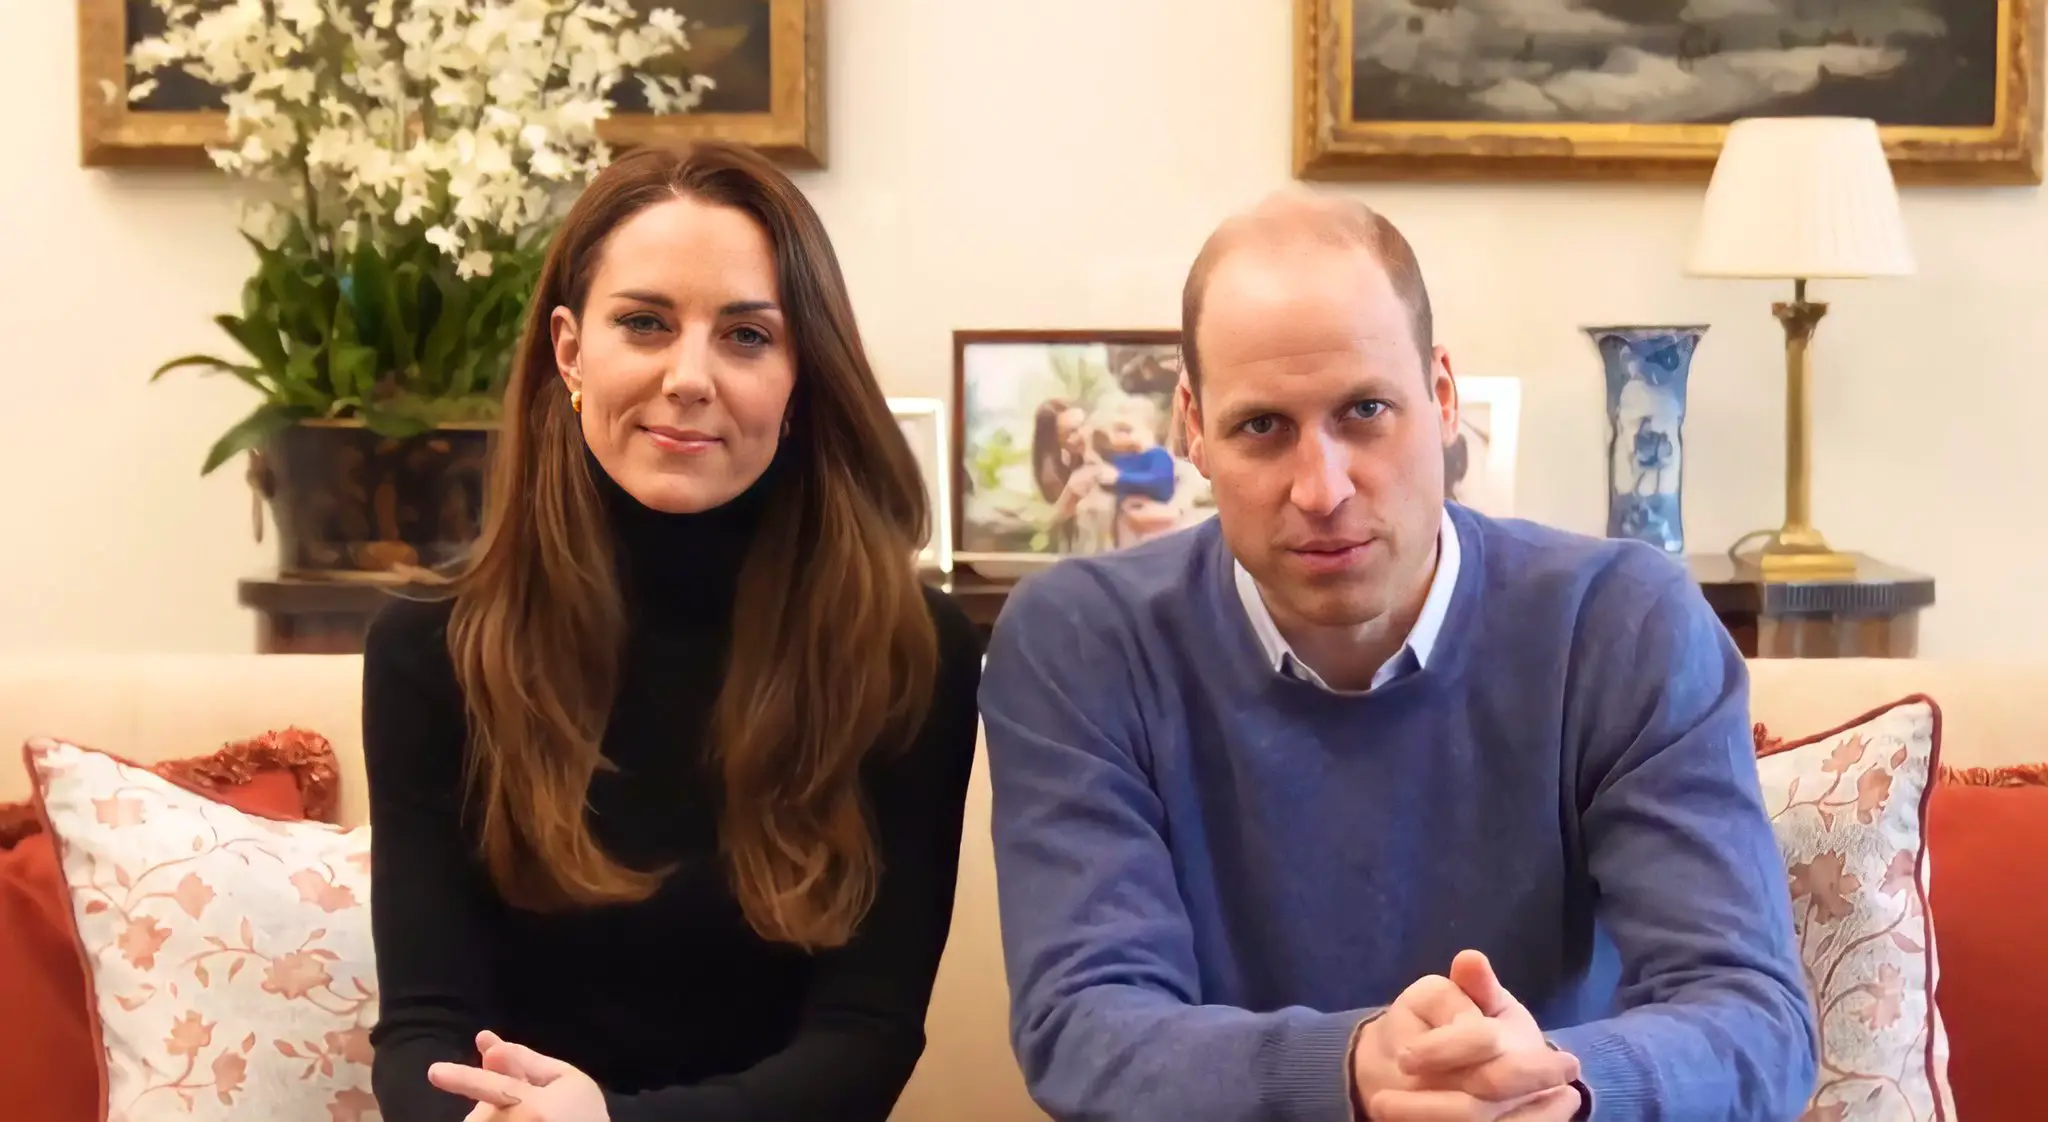 The Duke and Duchess of Cambridge Thanked “Time To Change”